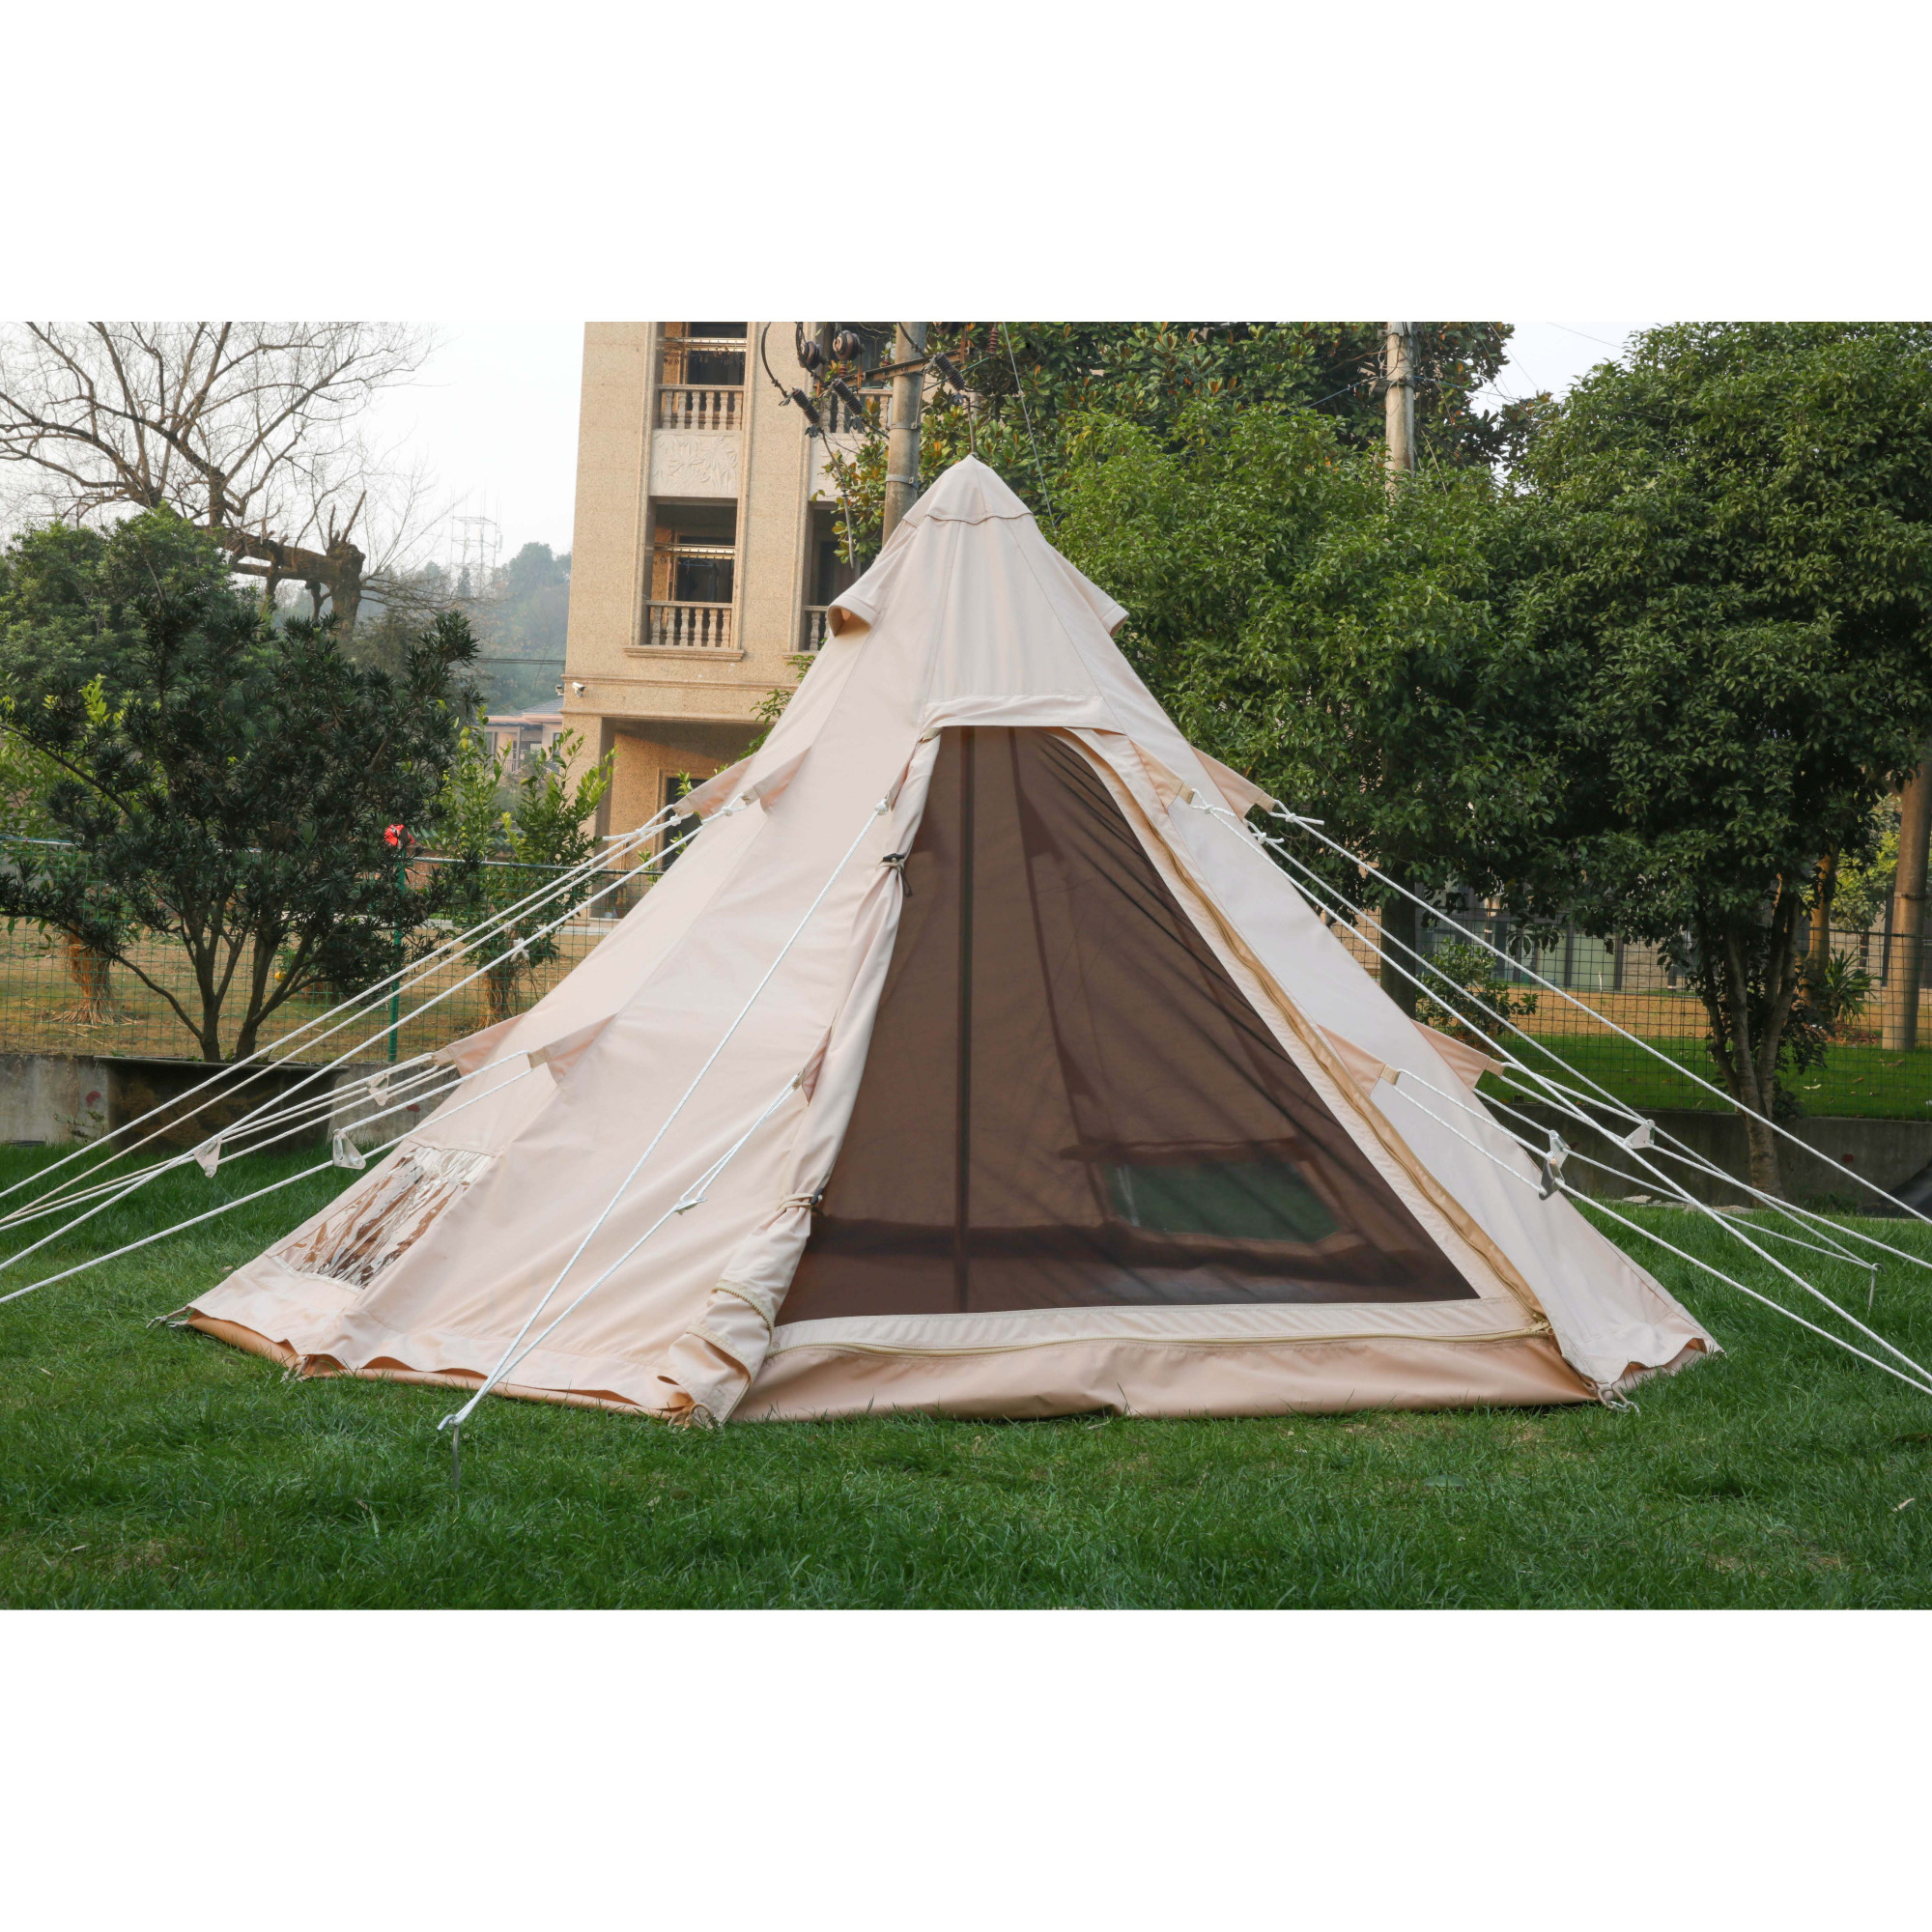 What Is a Bell Tent?